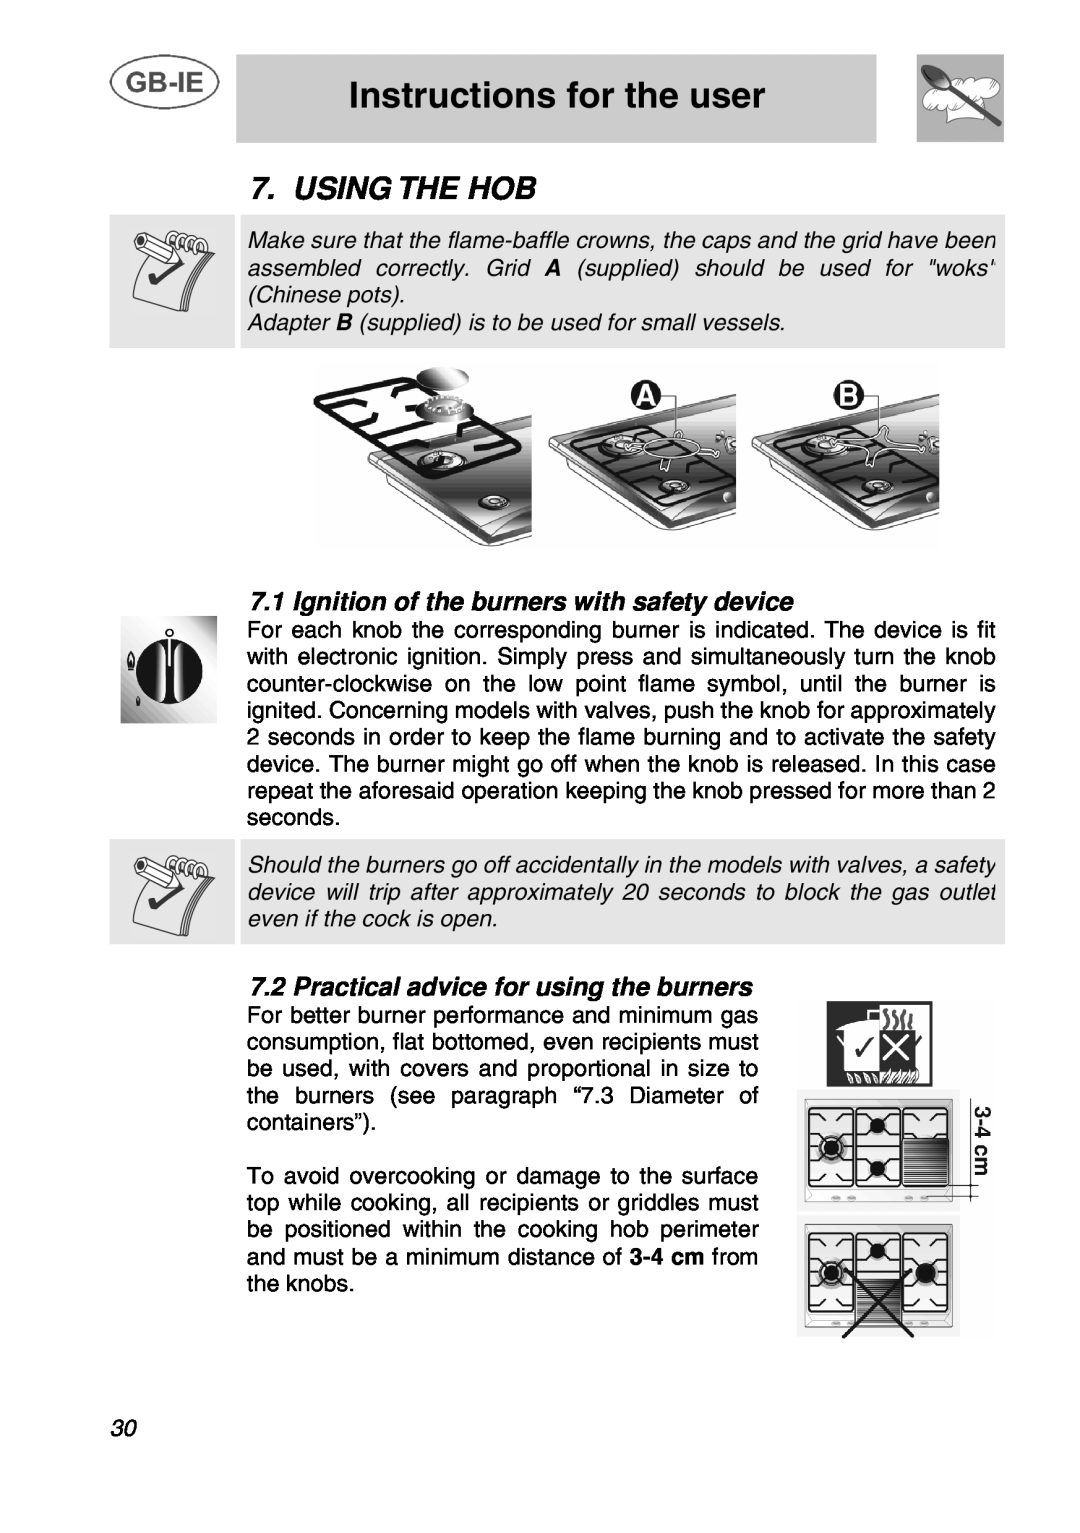 Bosch Appliances NCT 685 B, NET 682 N Instructions for the user, Using The Hob, Ignition of the burners with safety device 